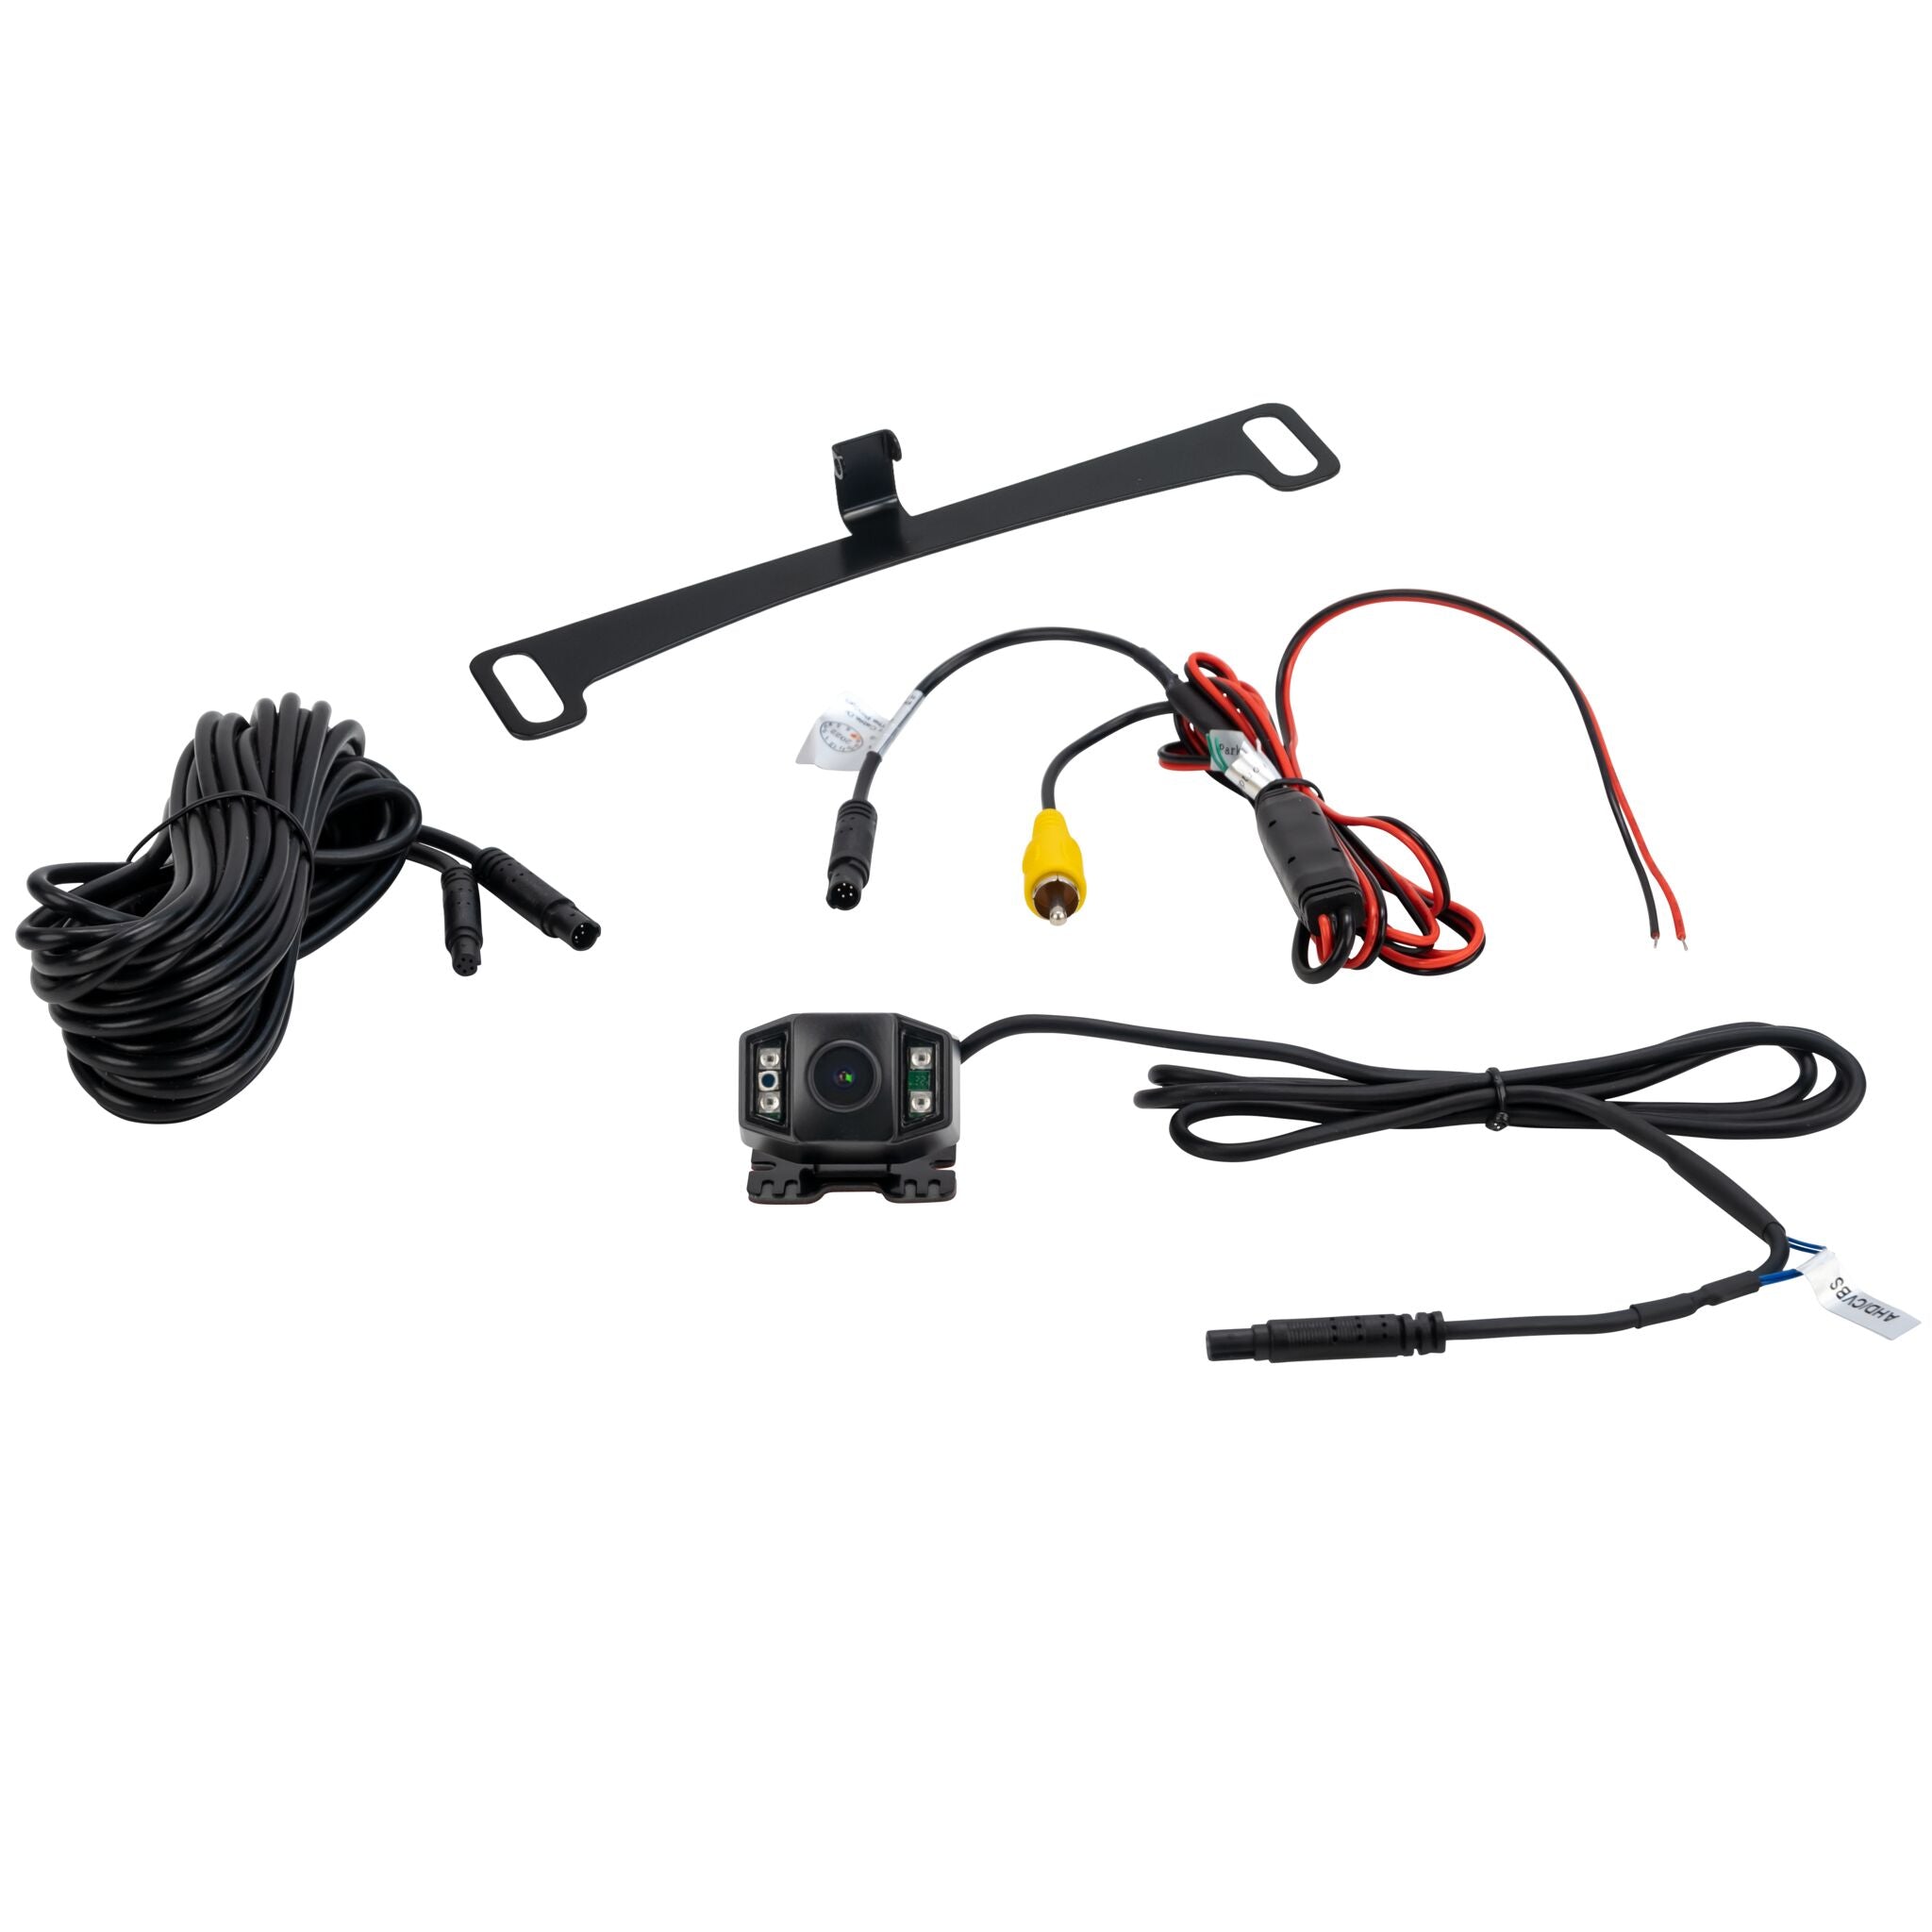 RAM Truck (2013-2018) HEIGH10 10" Radio Fully Integrated Kit with Front Facing Night Vision Camera